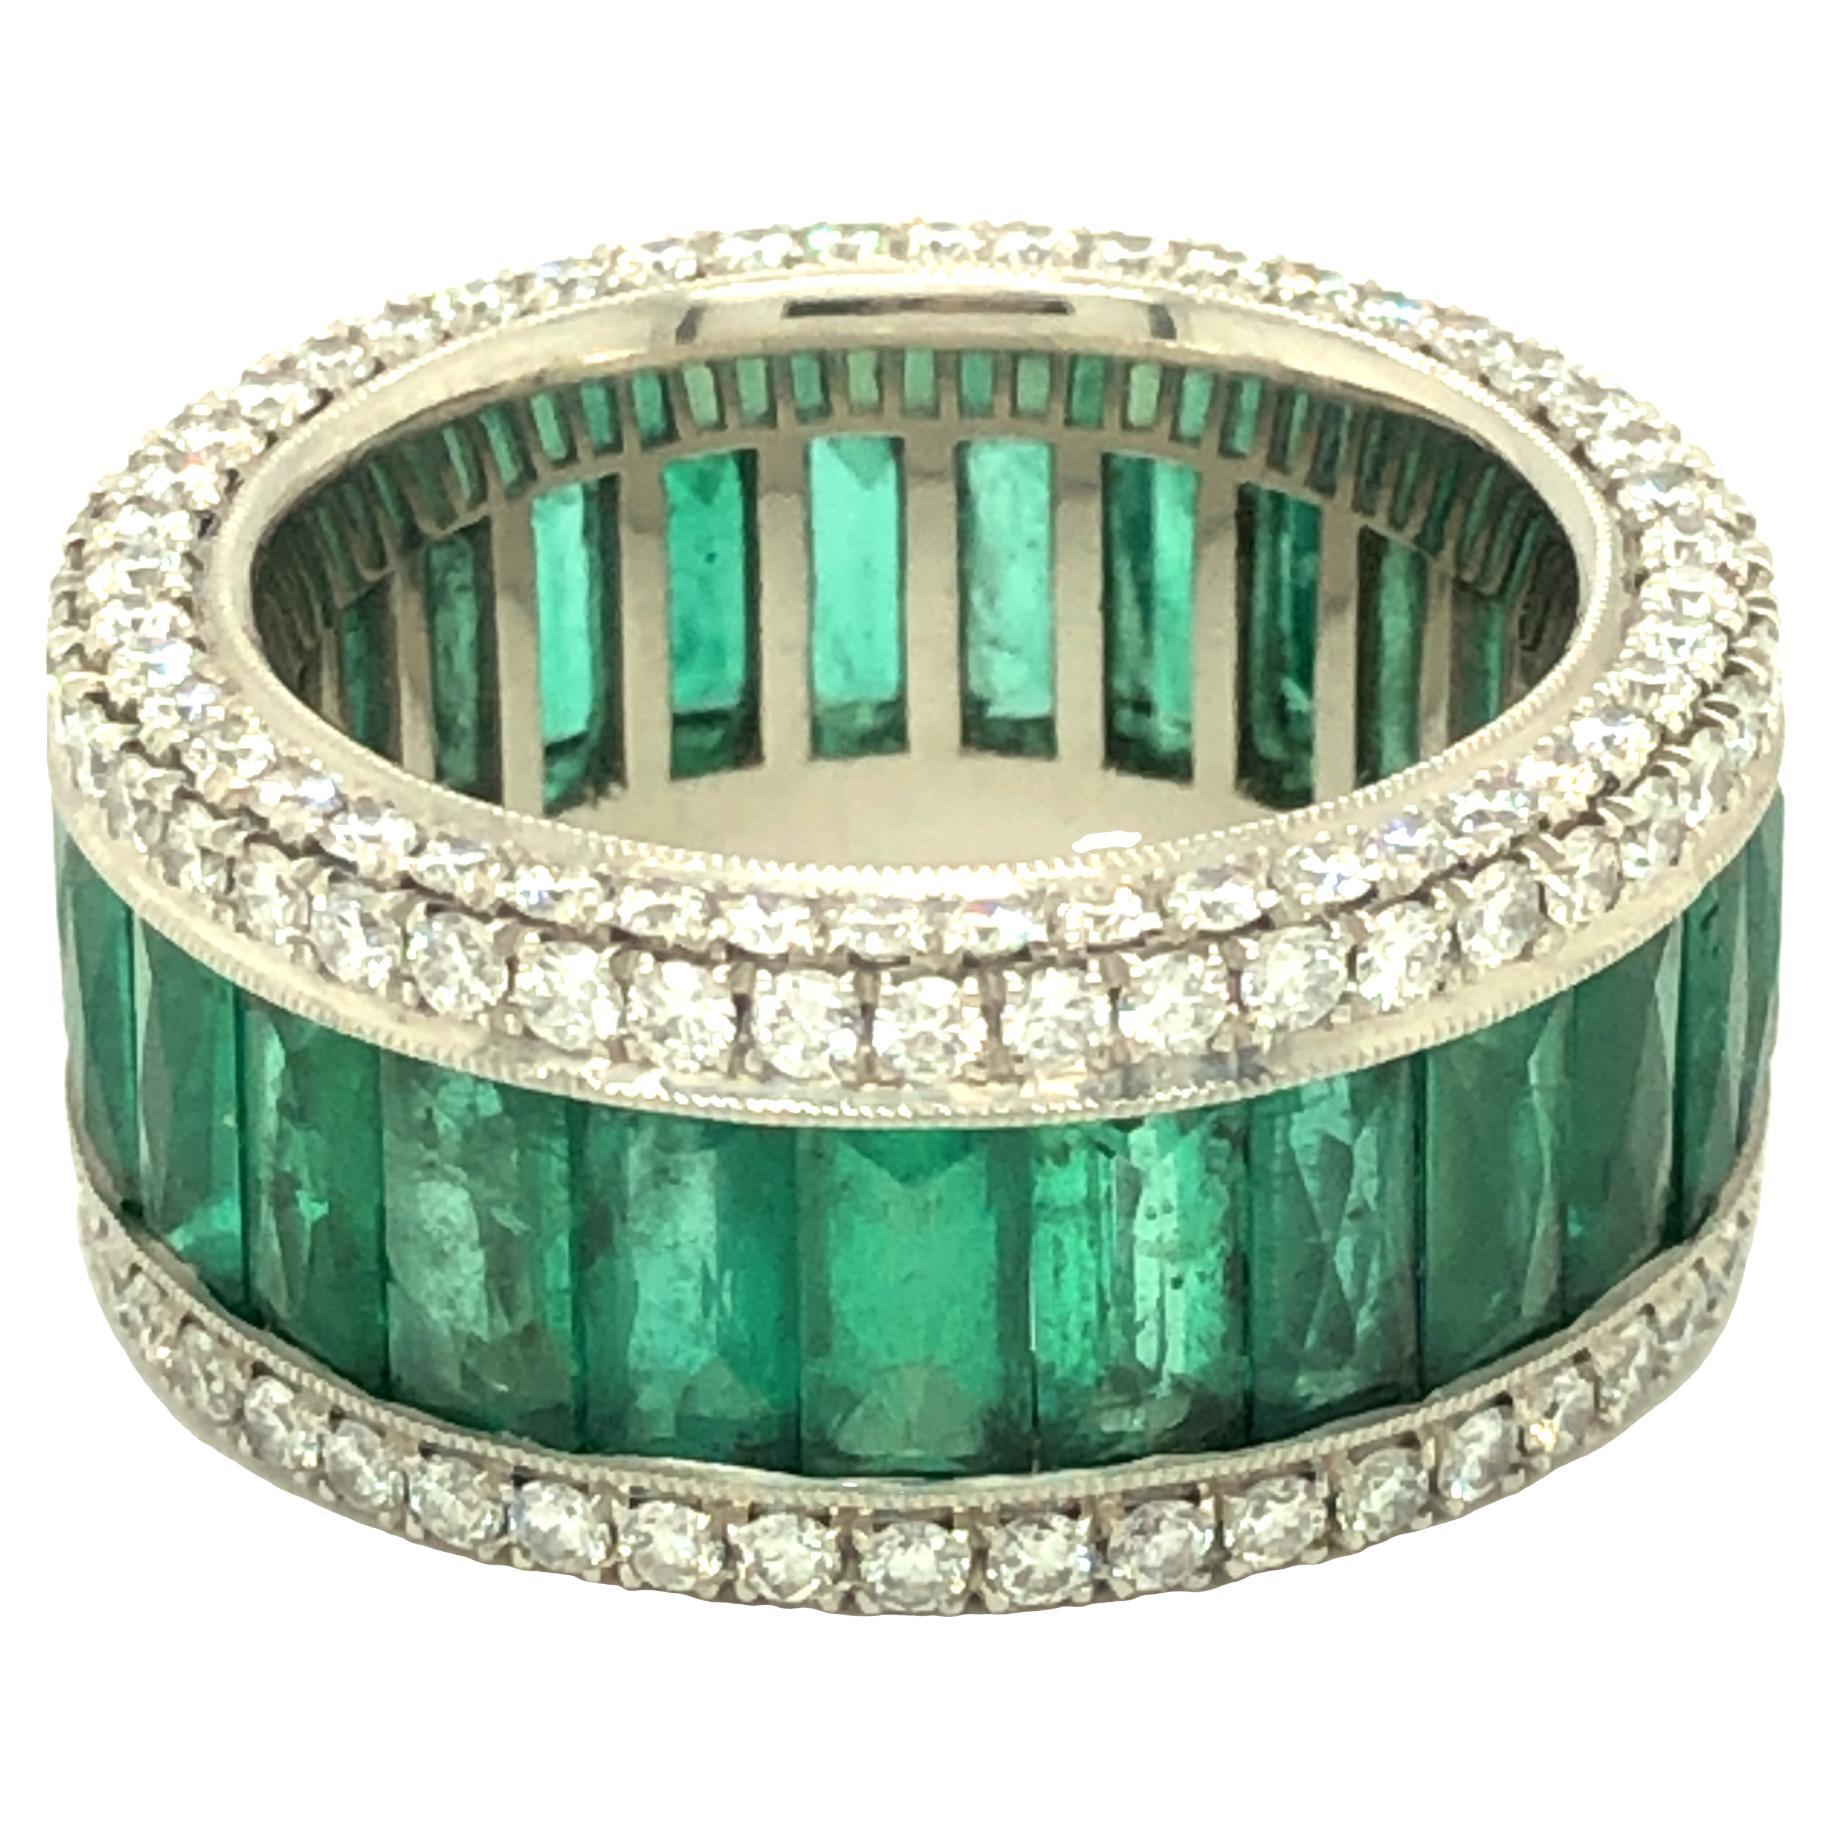 Gems Are Forever 7 carat French Cut Emerald & 2.07 carat Diamond Eternity Band For Sale